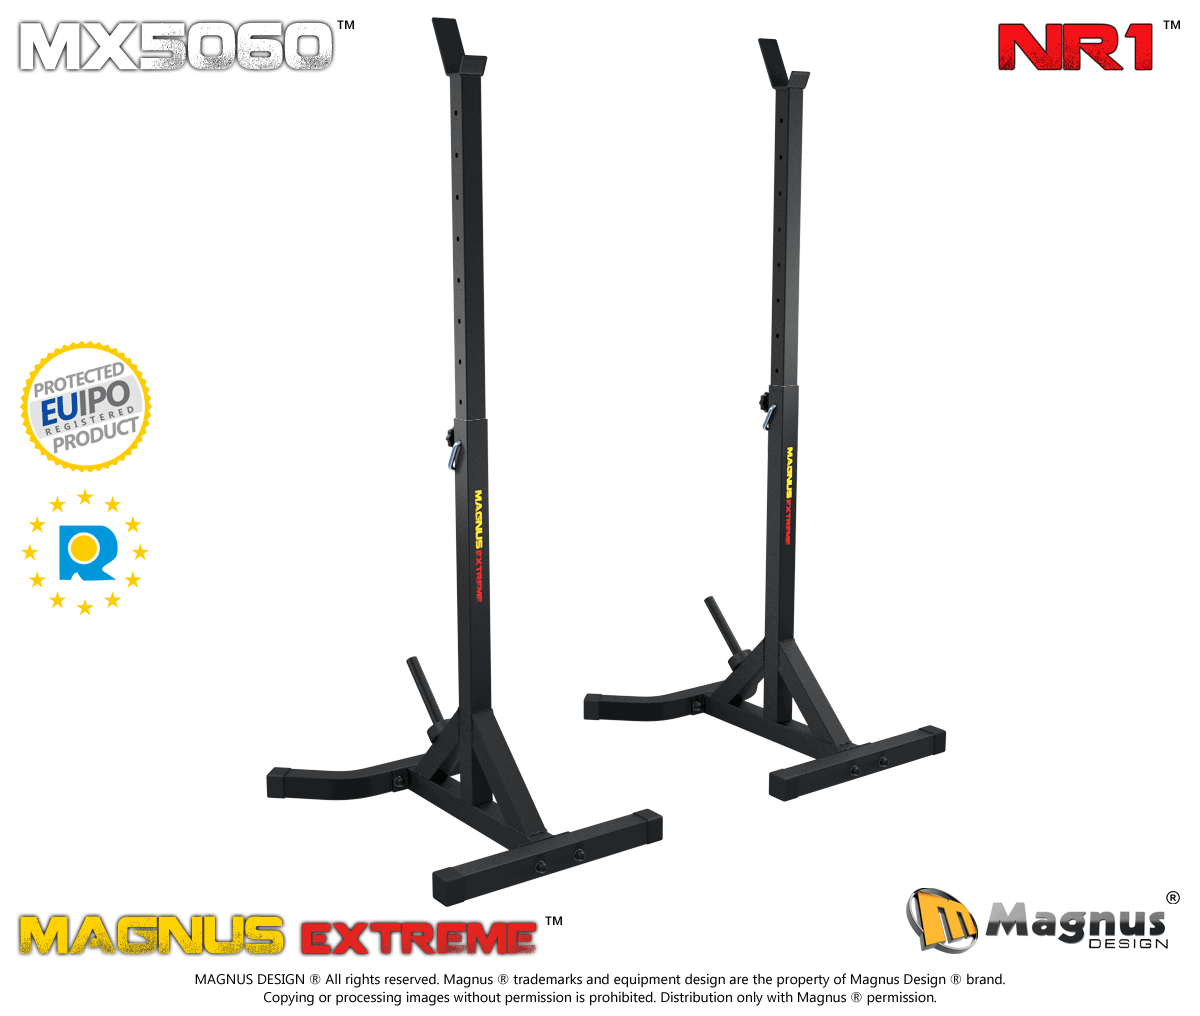 Solid training stands for barbell from MAGNUS DESIGN ®